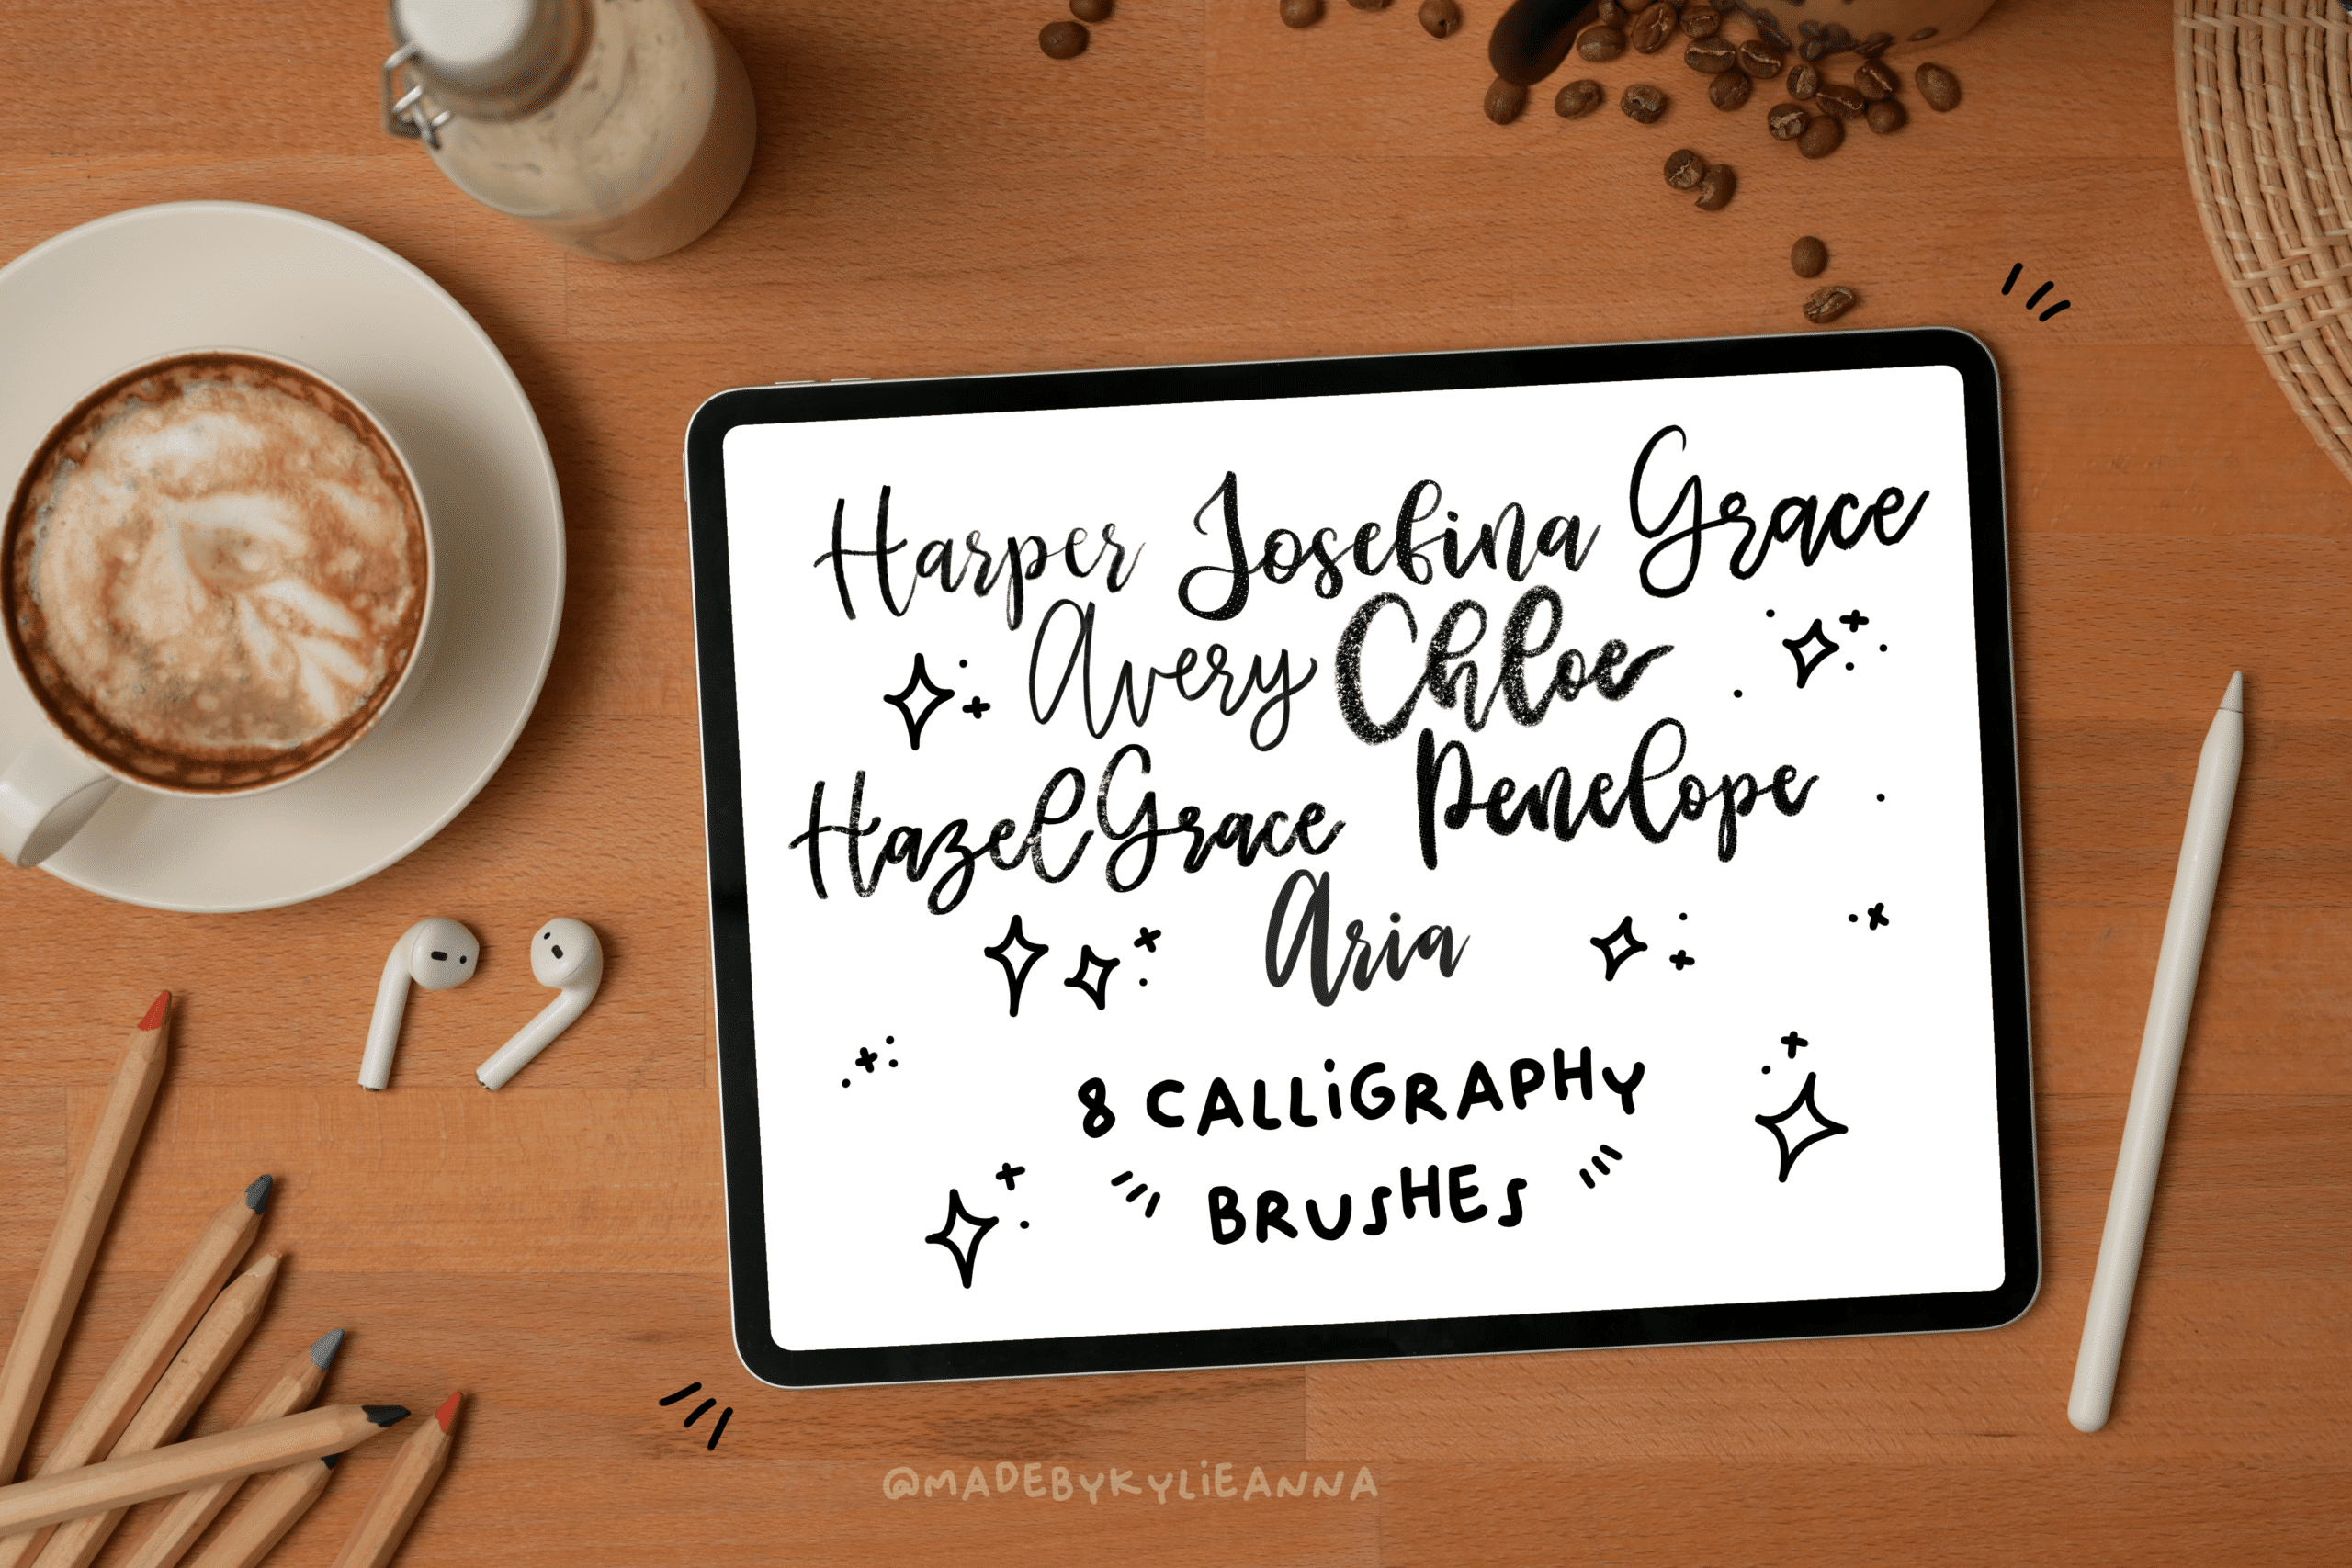 8 Calligraphy Brushes for Procreate